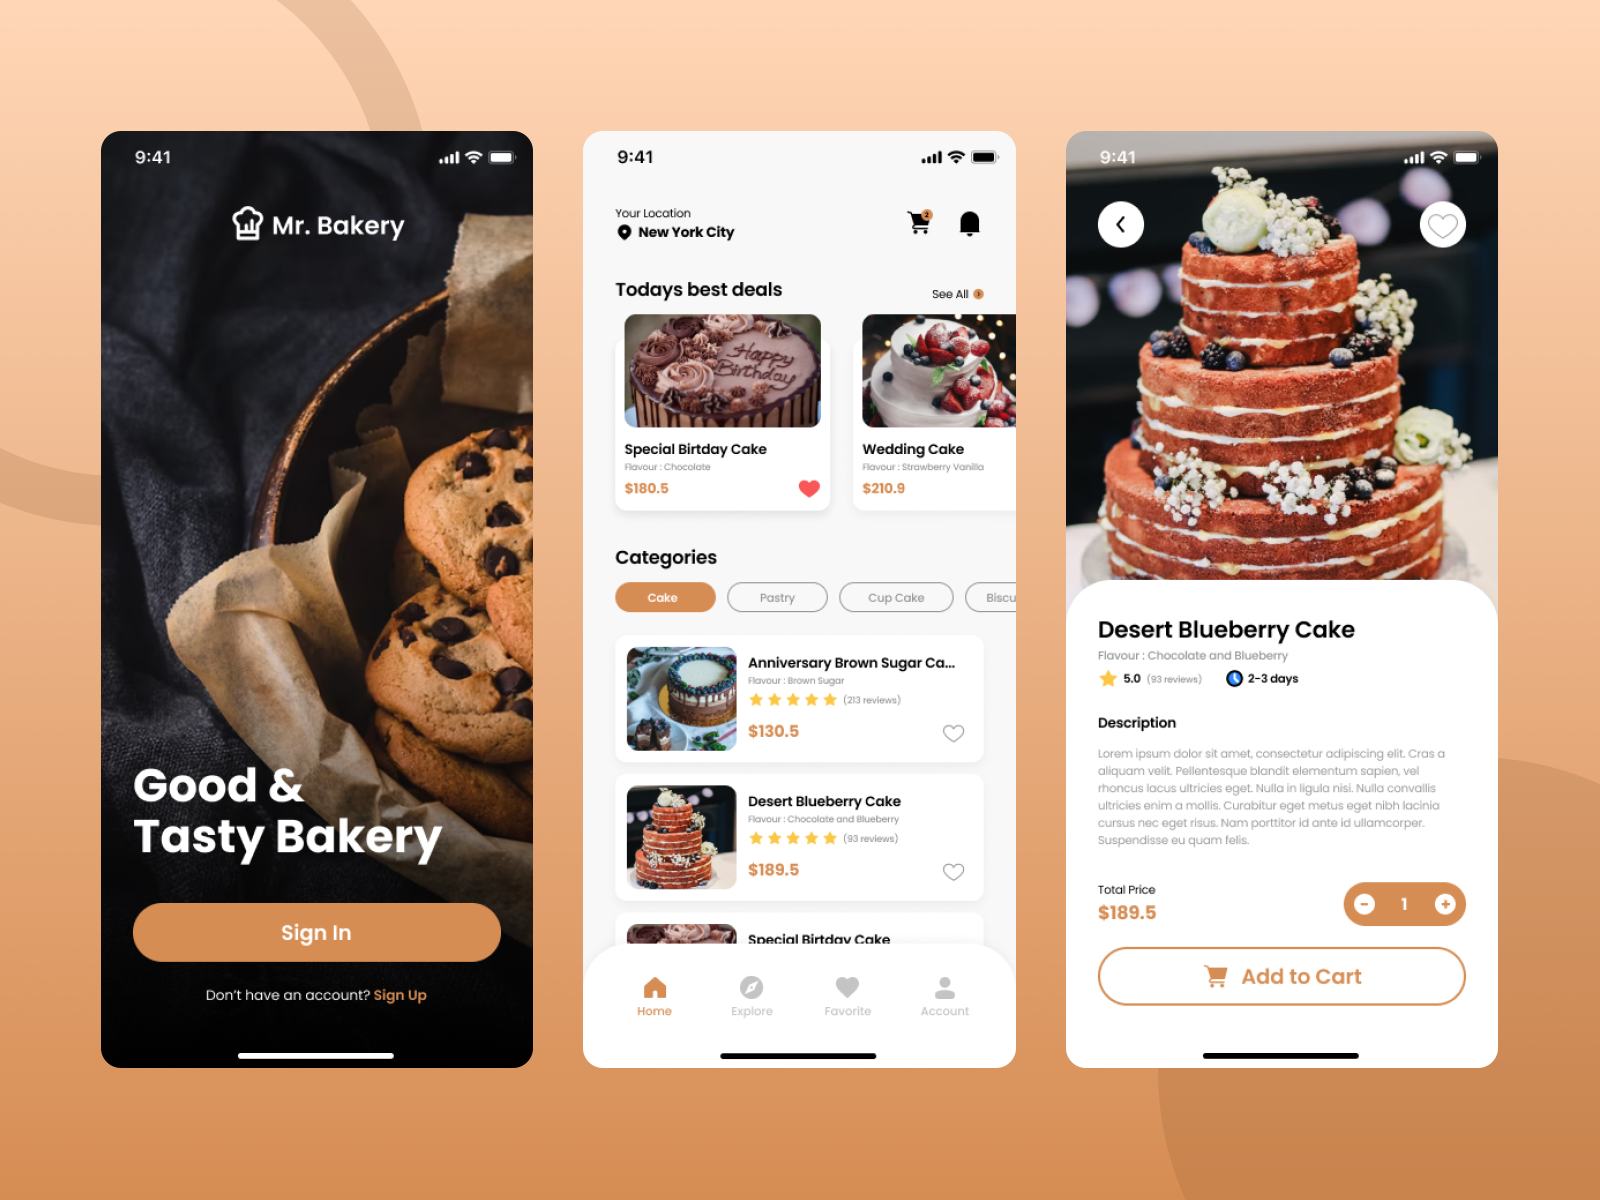 Bakery and Cake Shop UI Mobile App Design by Arba Studio on Dribbble